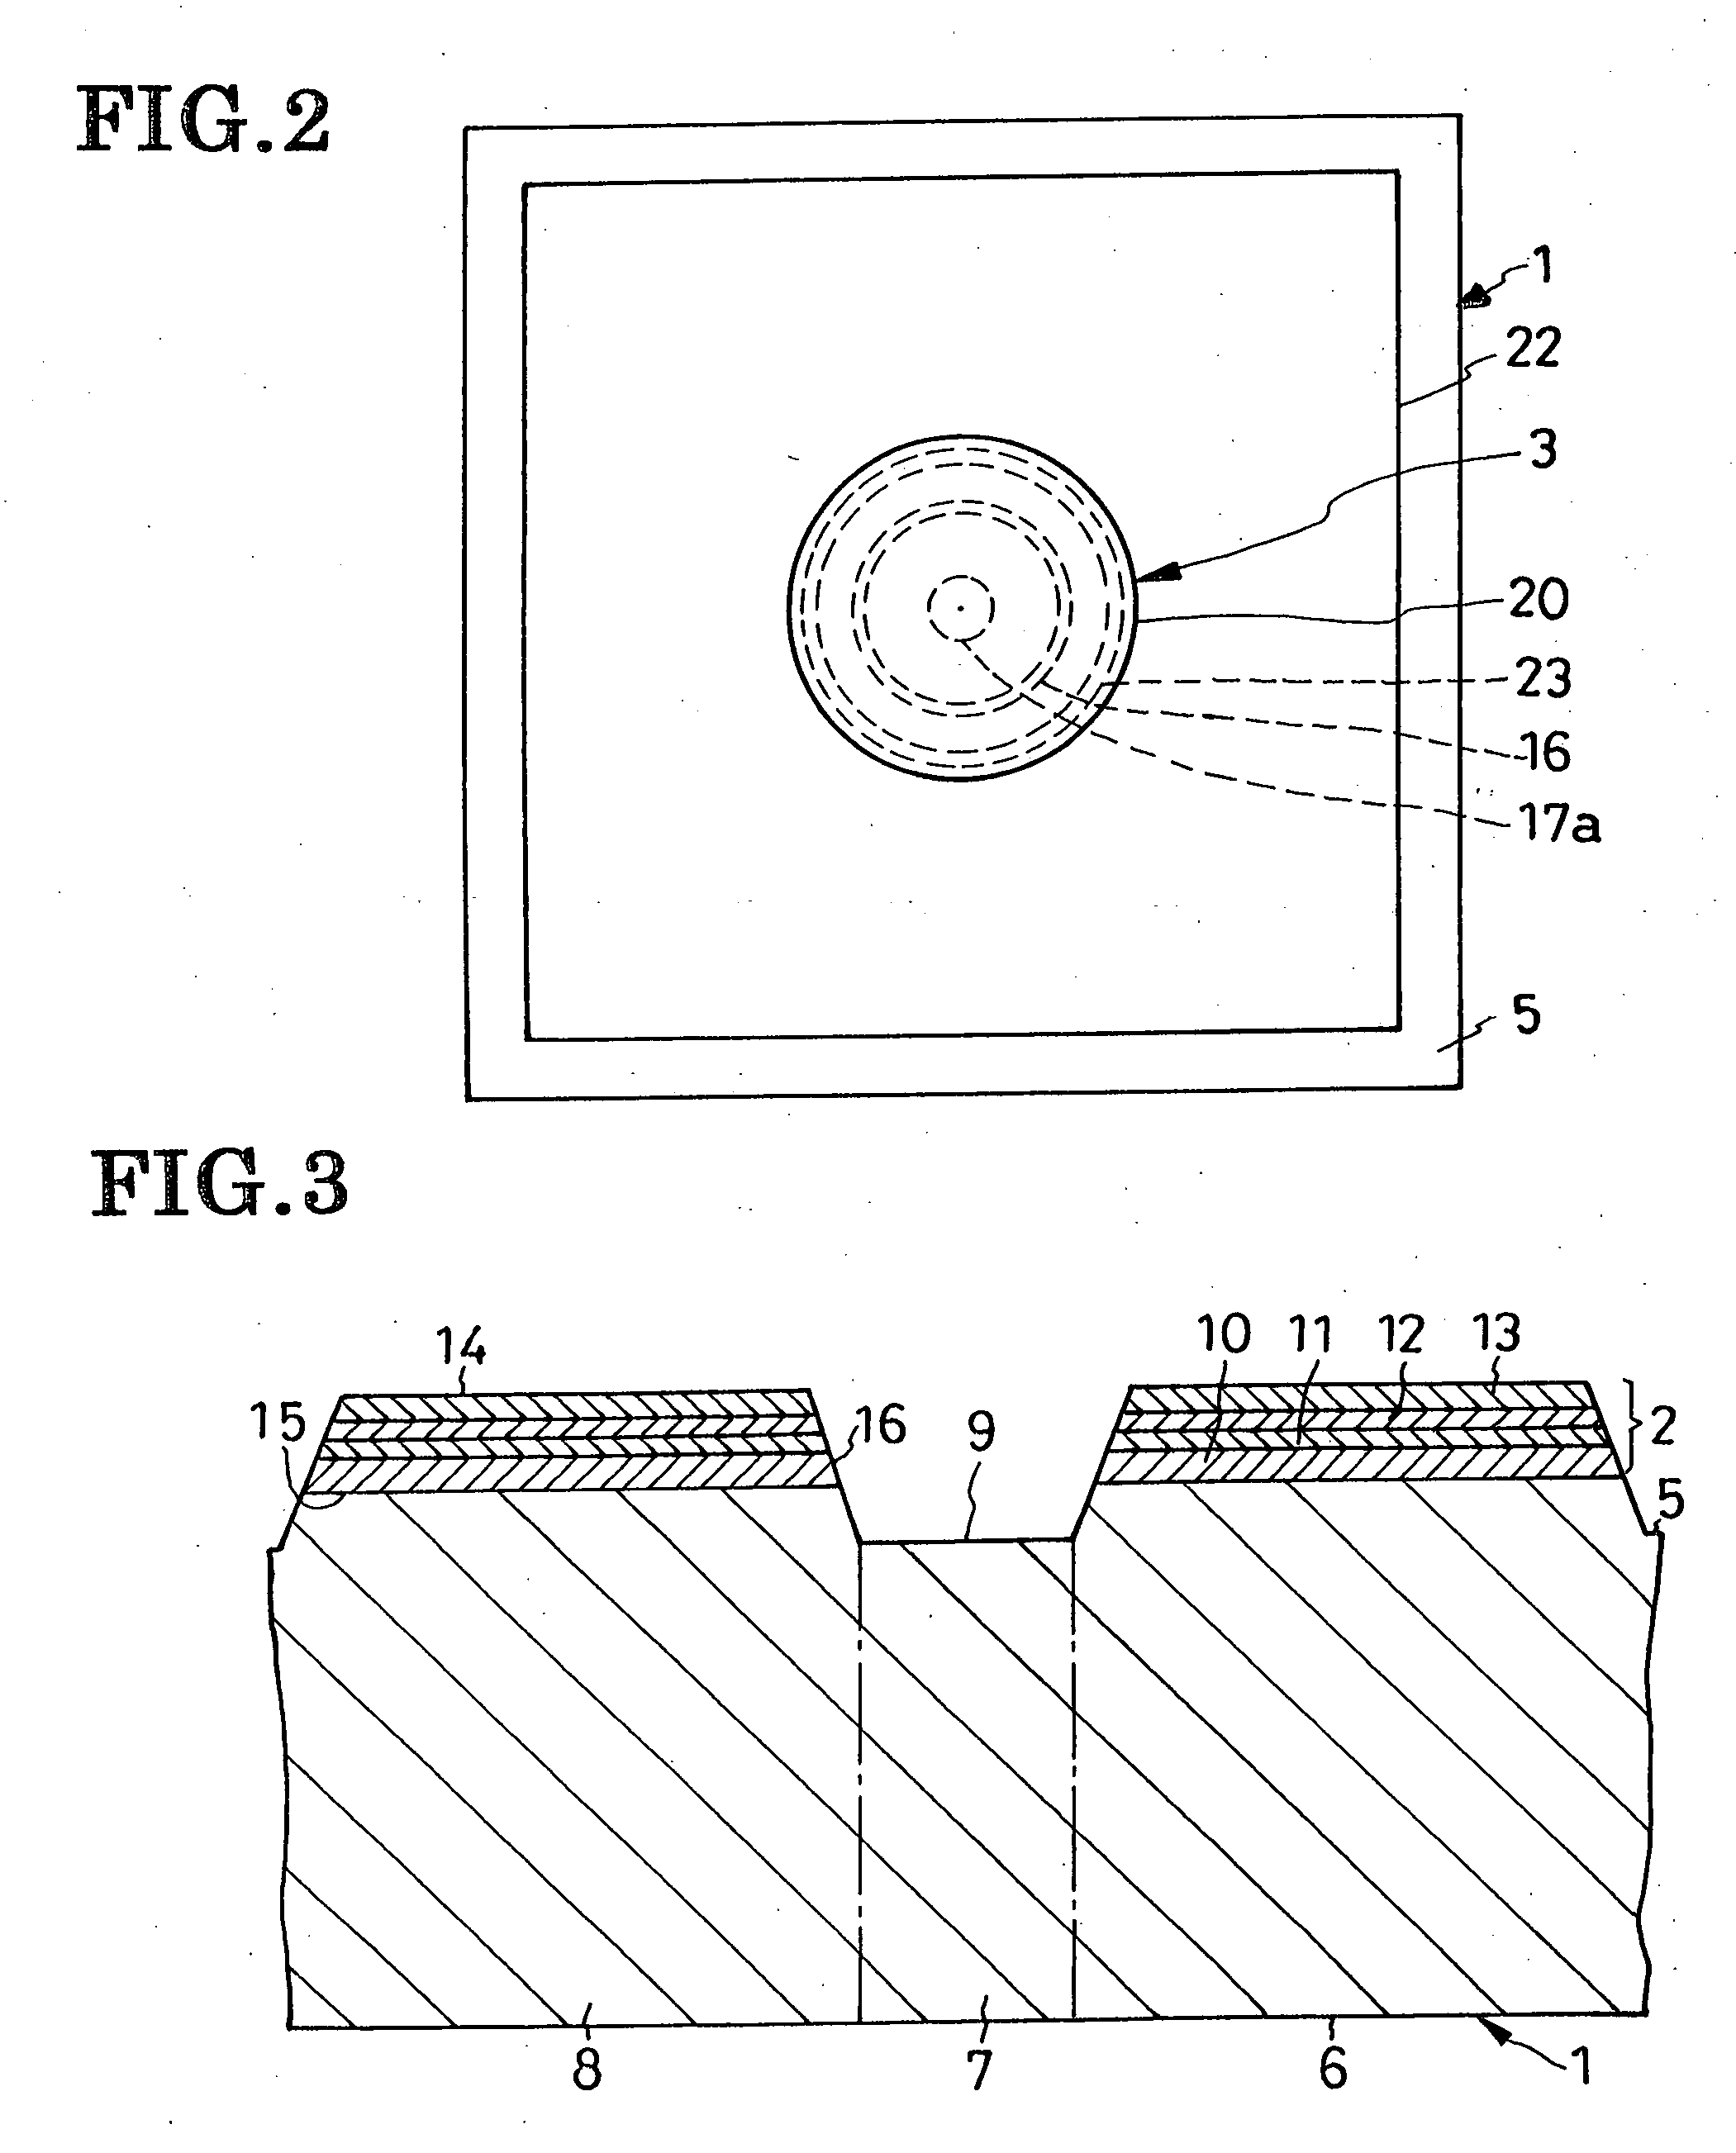 Light-emitting semiconductor device with a built-in overvoltage protector